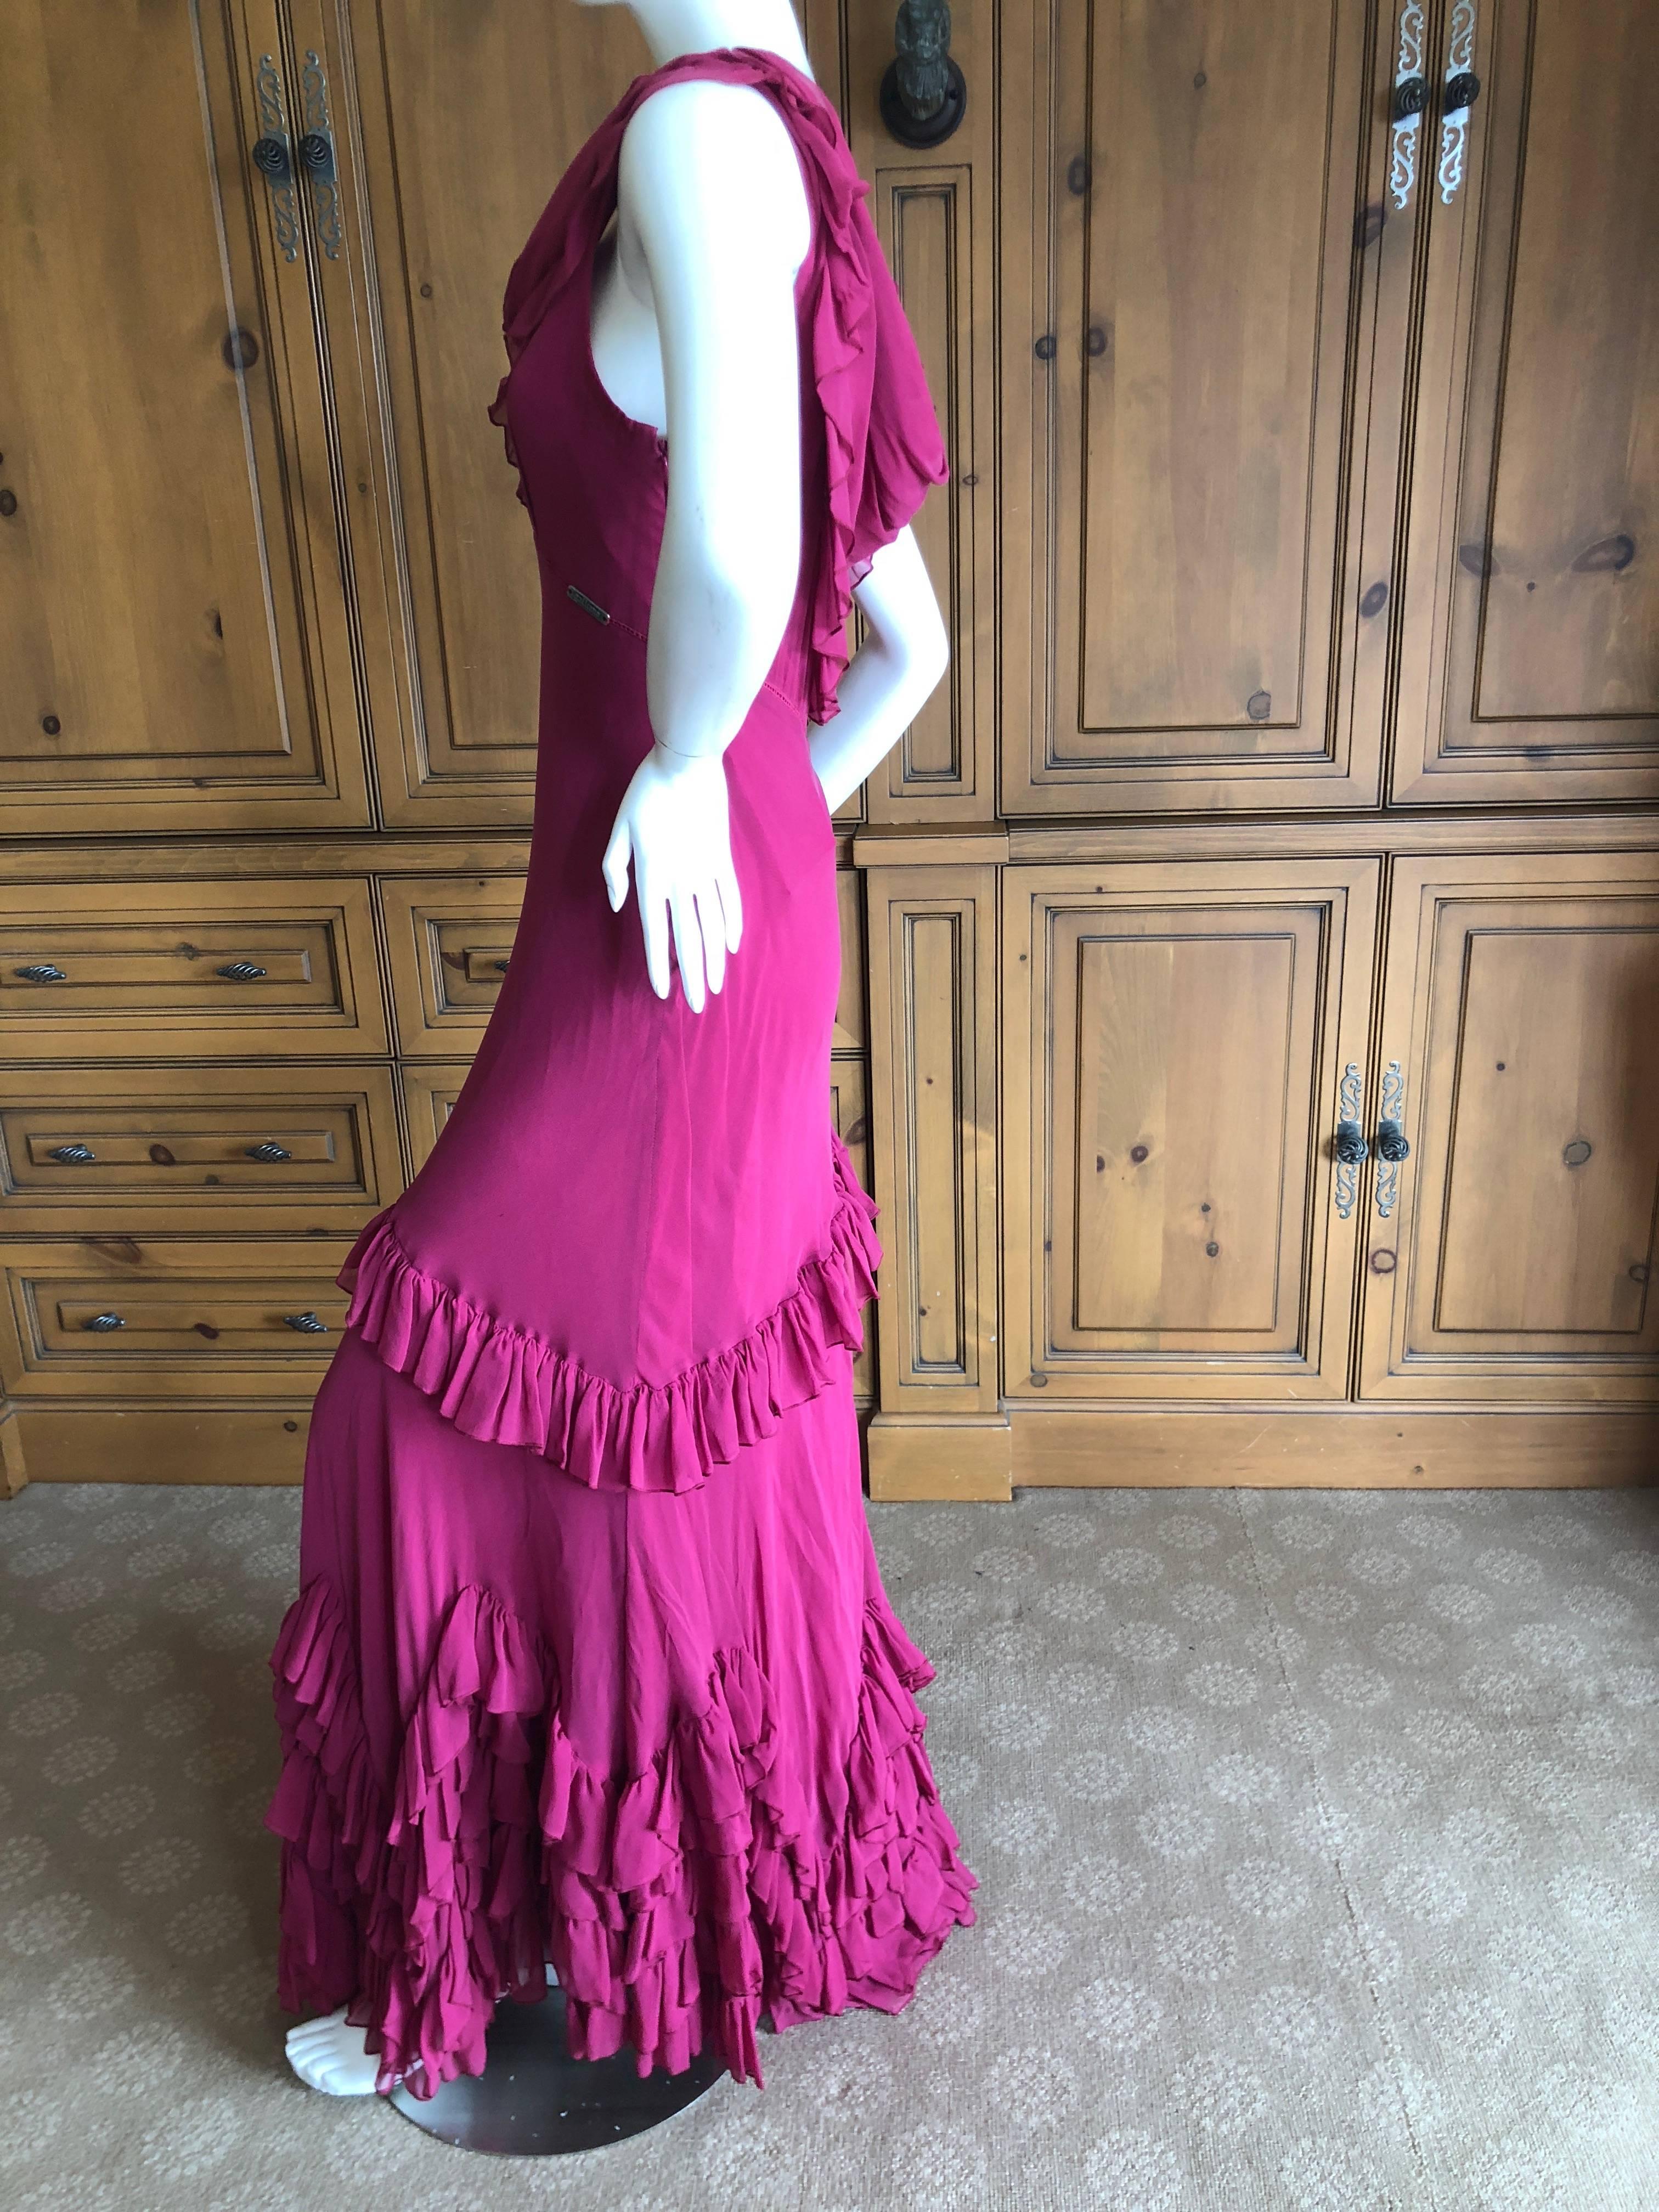 John Galliano Raspberry Sheer Vintage Silk Ruffled Evening Dress with Cowl Back 
Size 42
New with Tags
 Bust 38